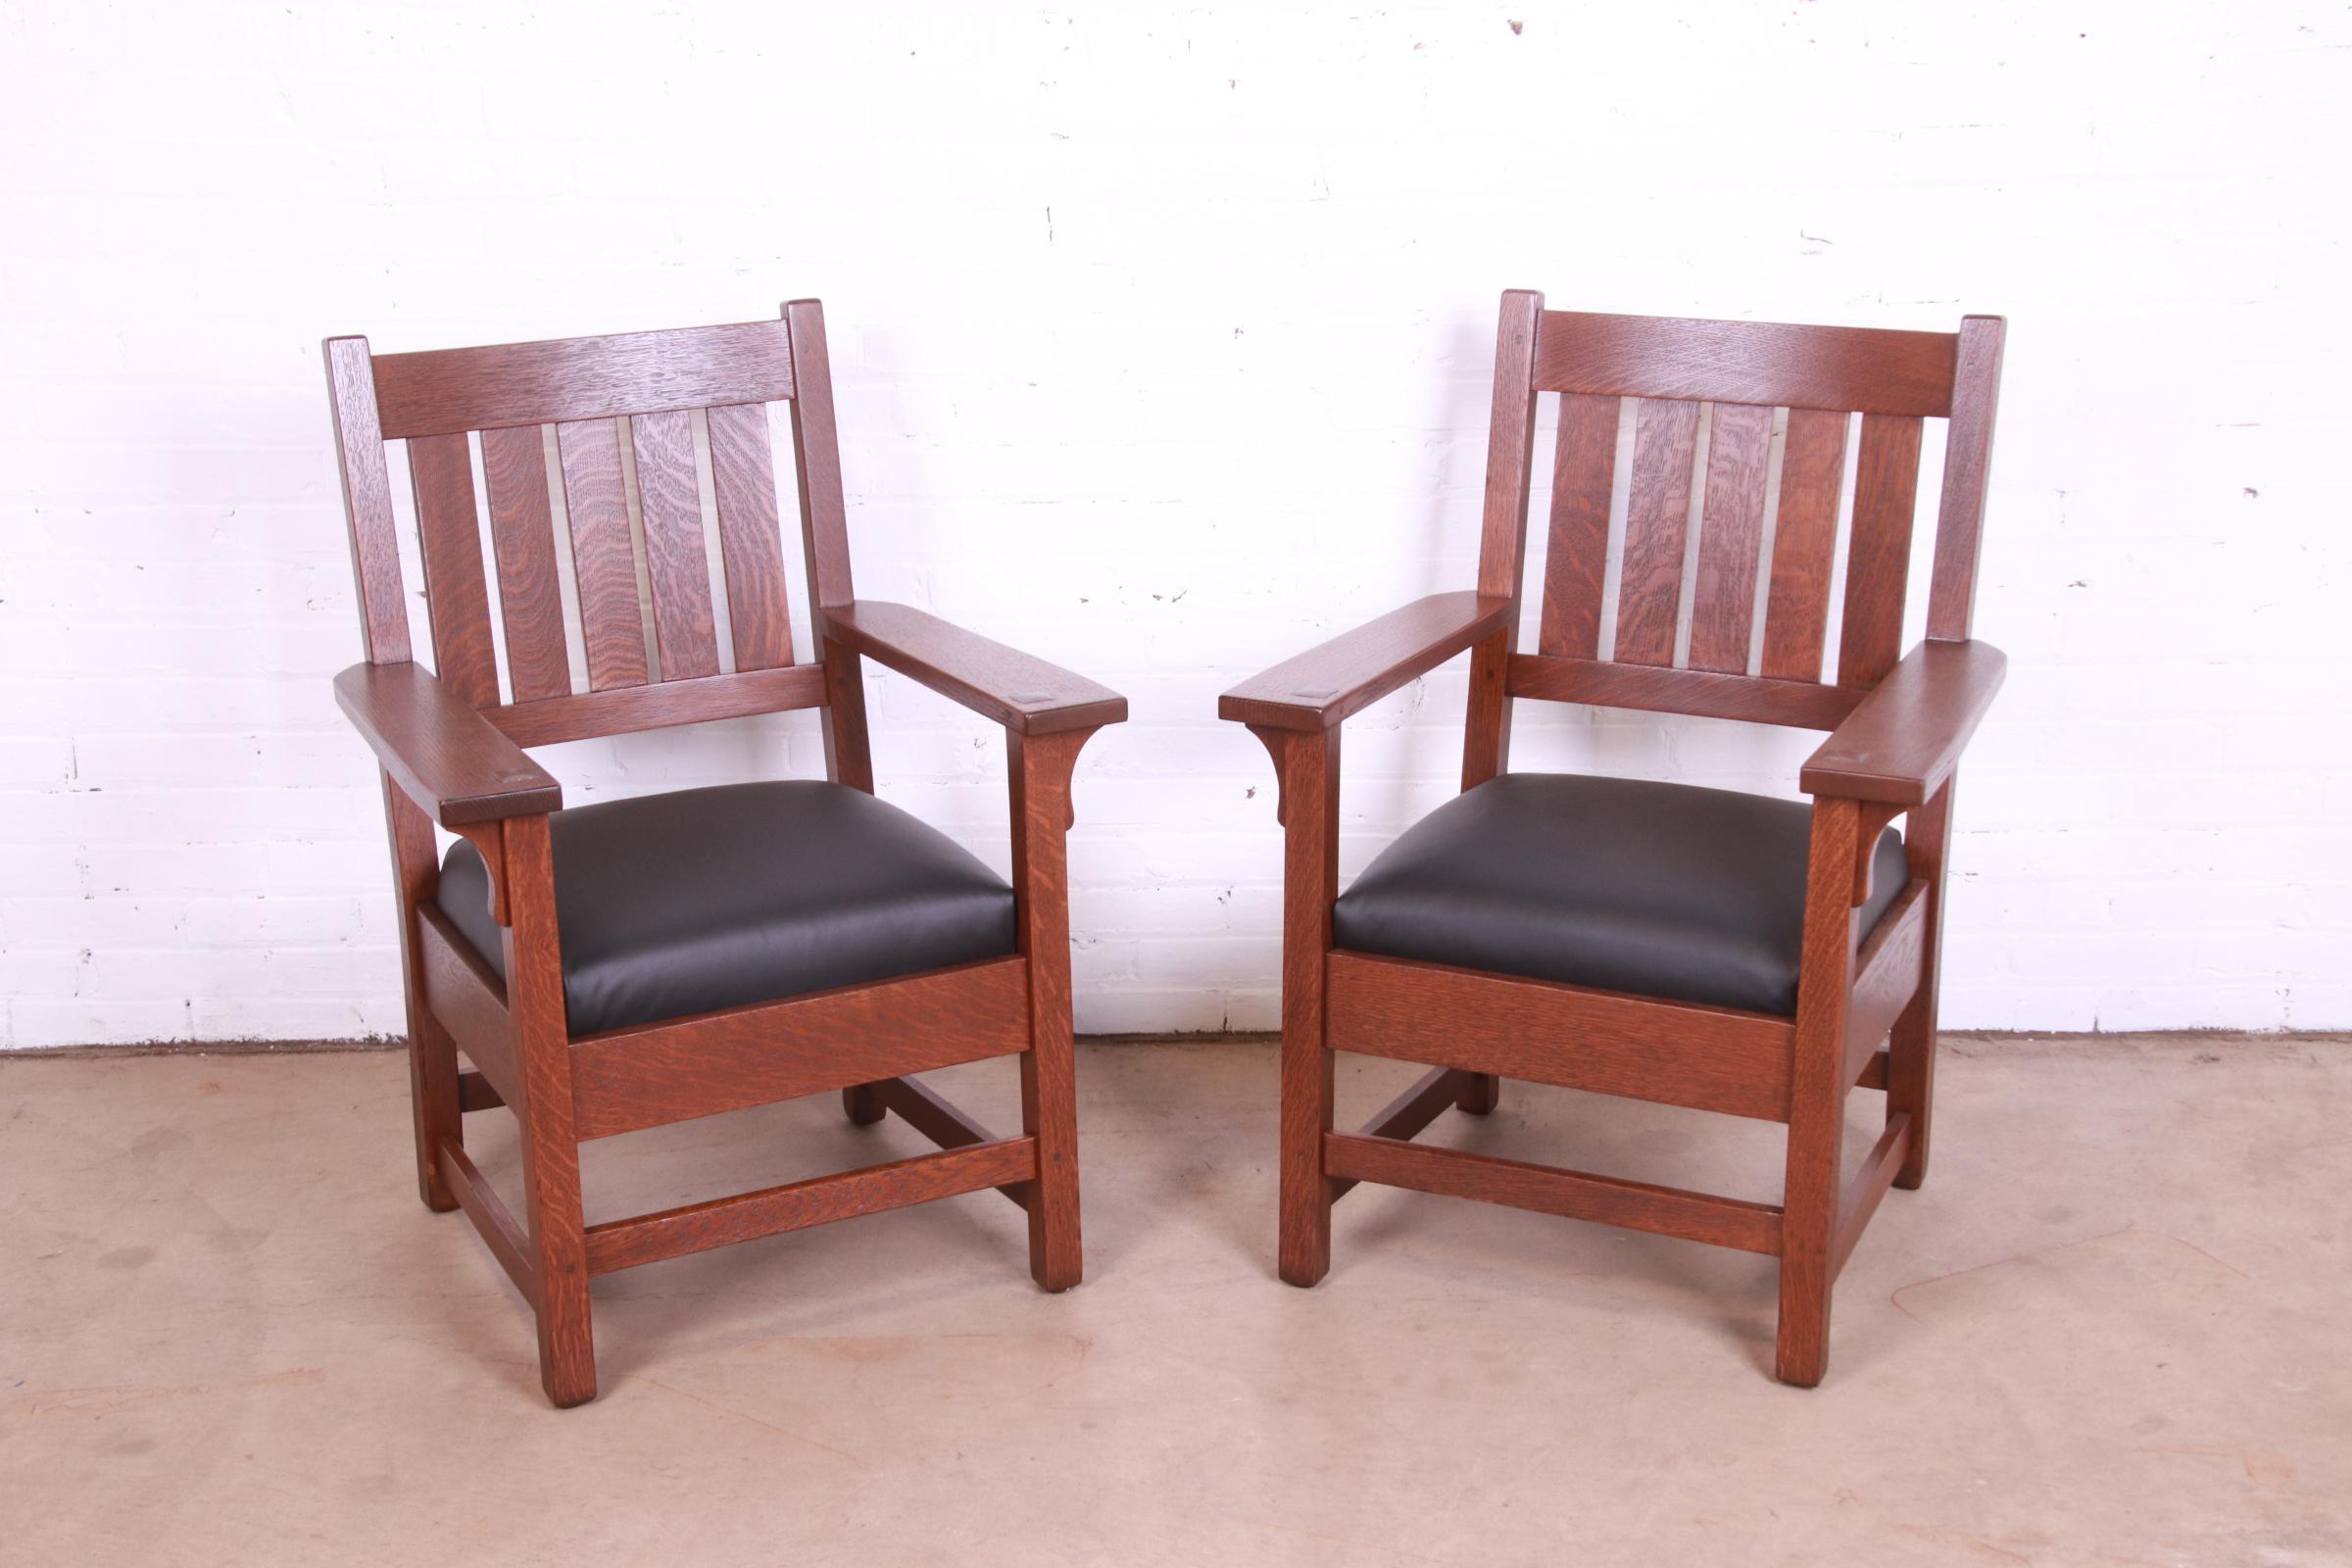 An exceptional pair of Mission Arts & Crafts lounge chairs or club chairs

By Gustav Stickley

USA, Circa 1909

Solid quarter sawn oak frames, with black leather seats.

Measures: 27.13